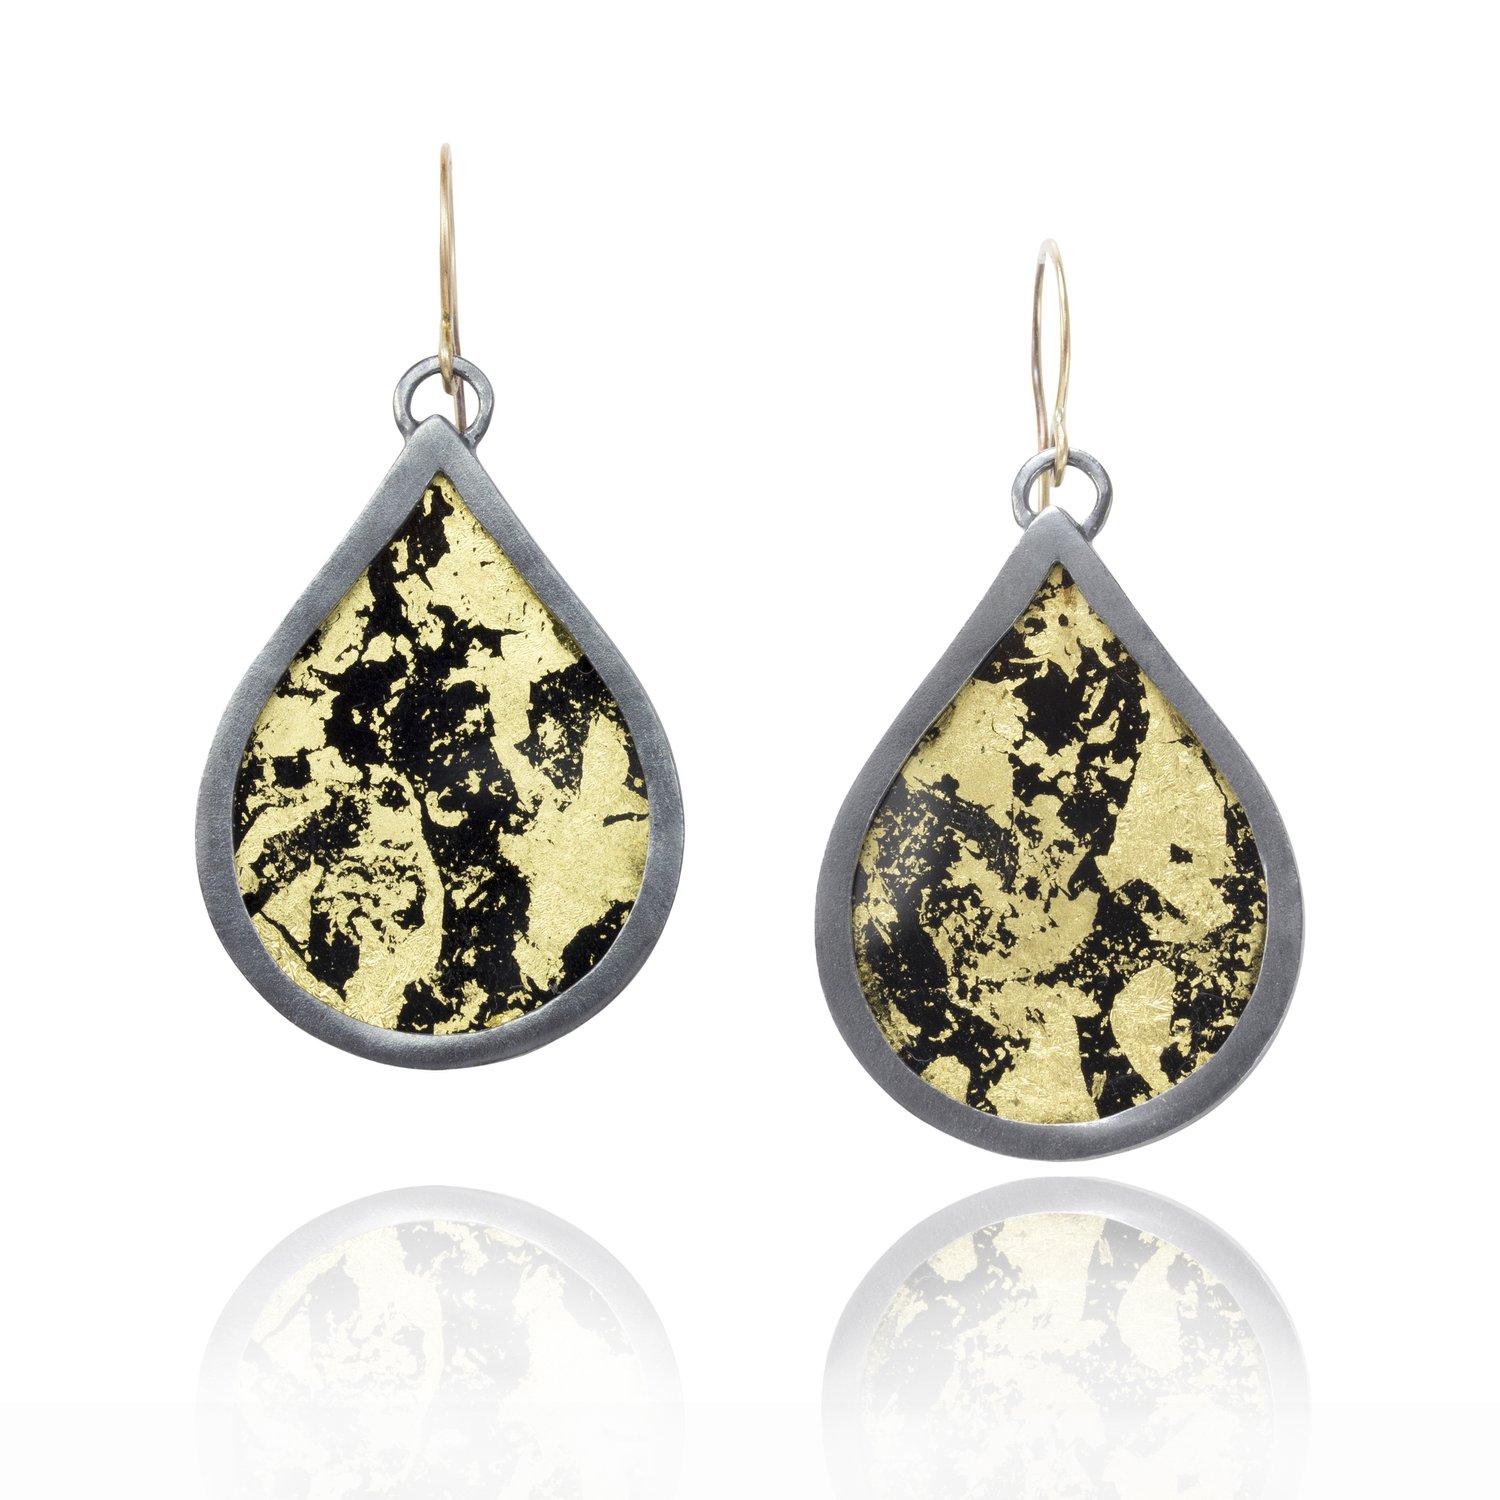 Pressed Flower & Resin Jewelry Making Workshop Tickets, Sat, Feb 10, 2024  at 11:00 AM